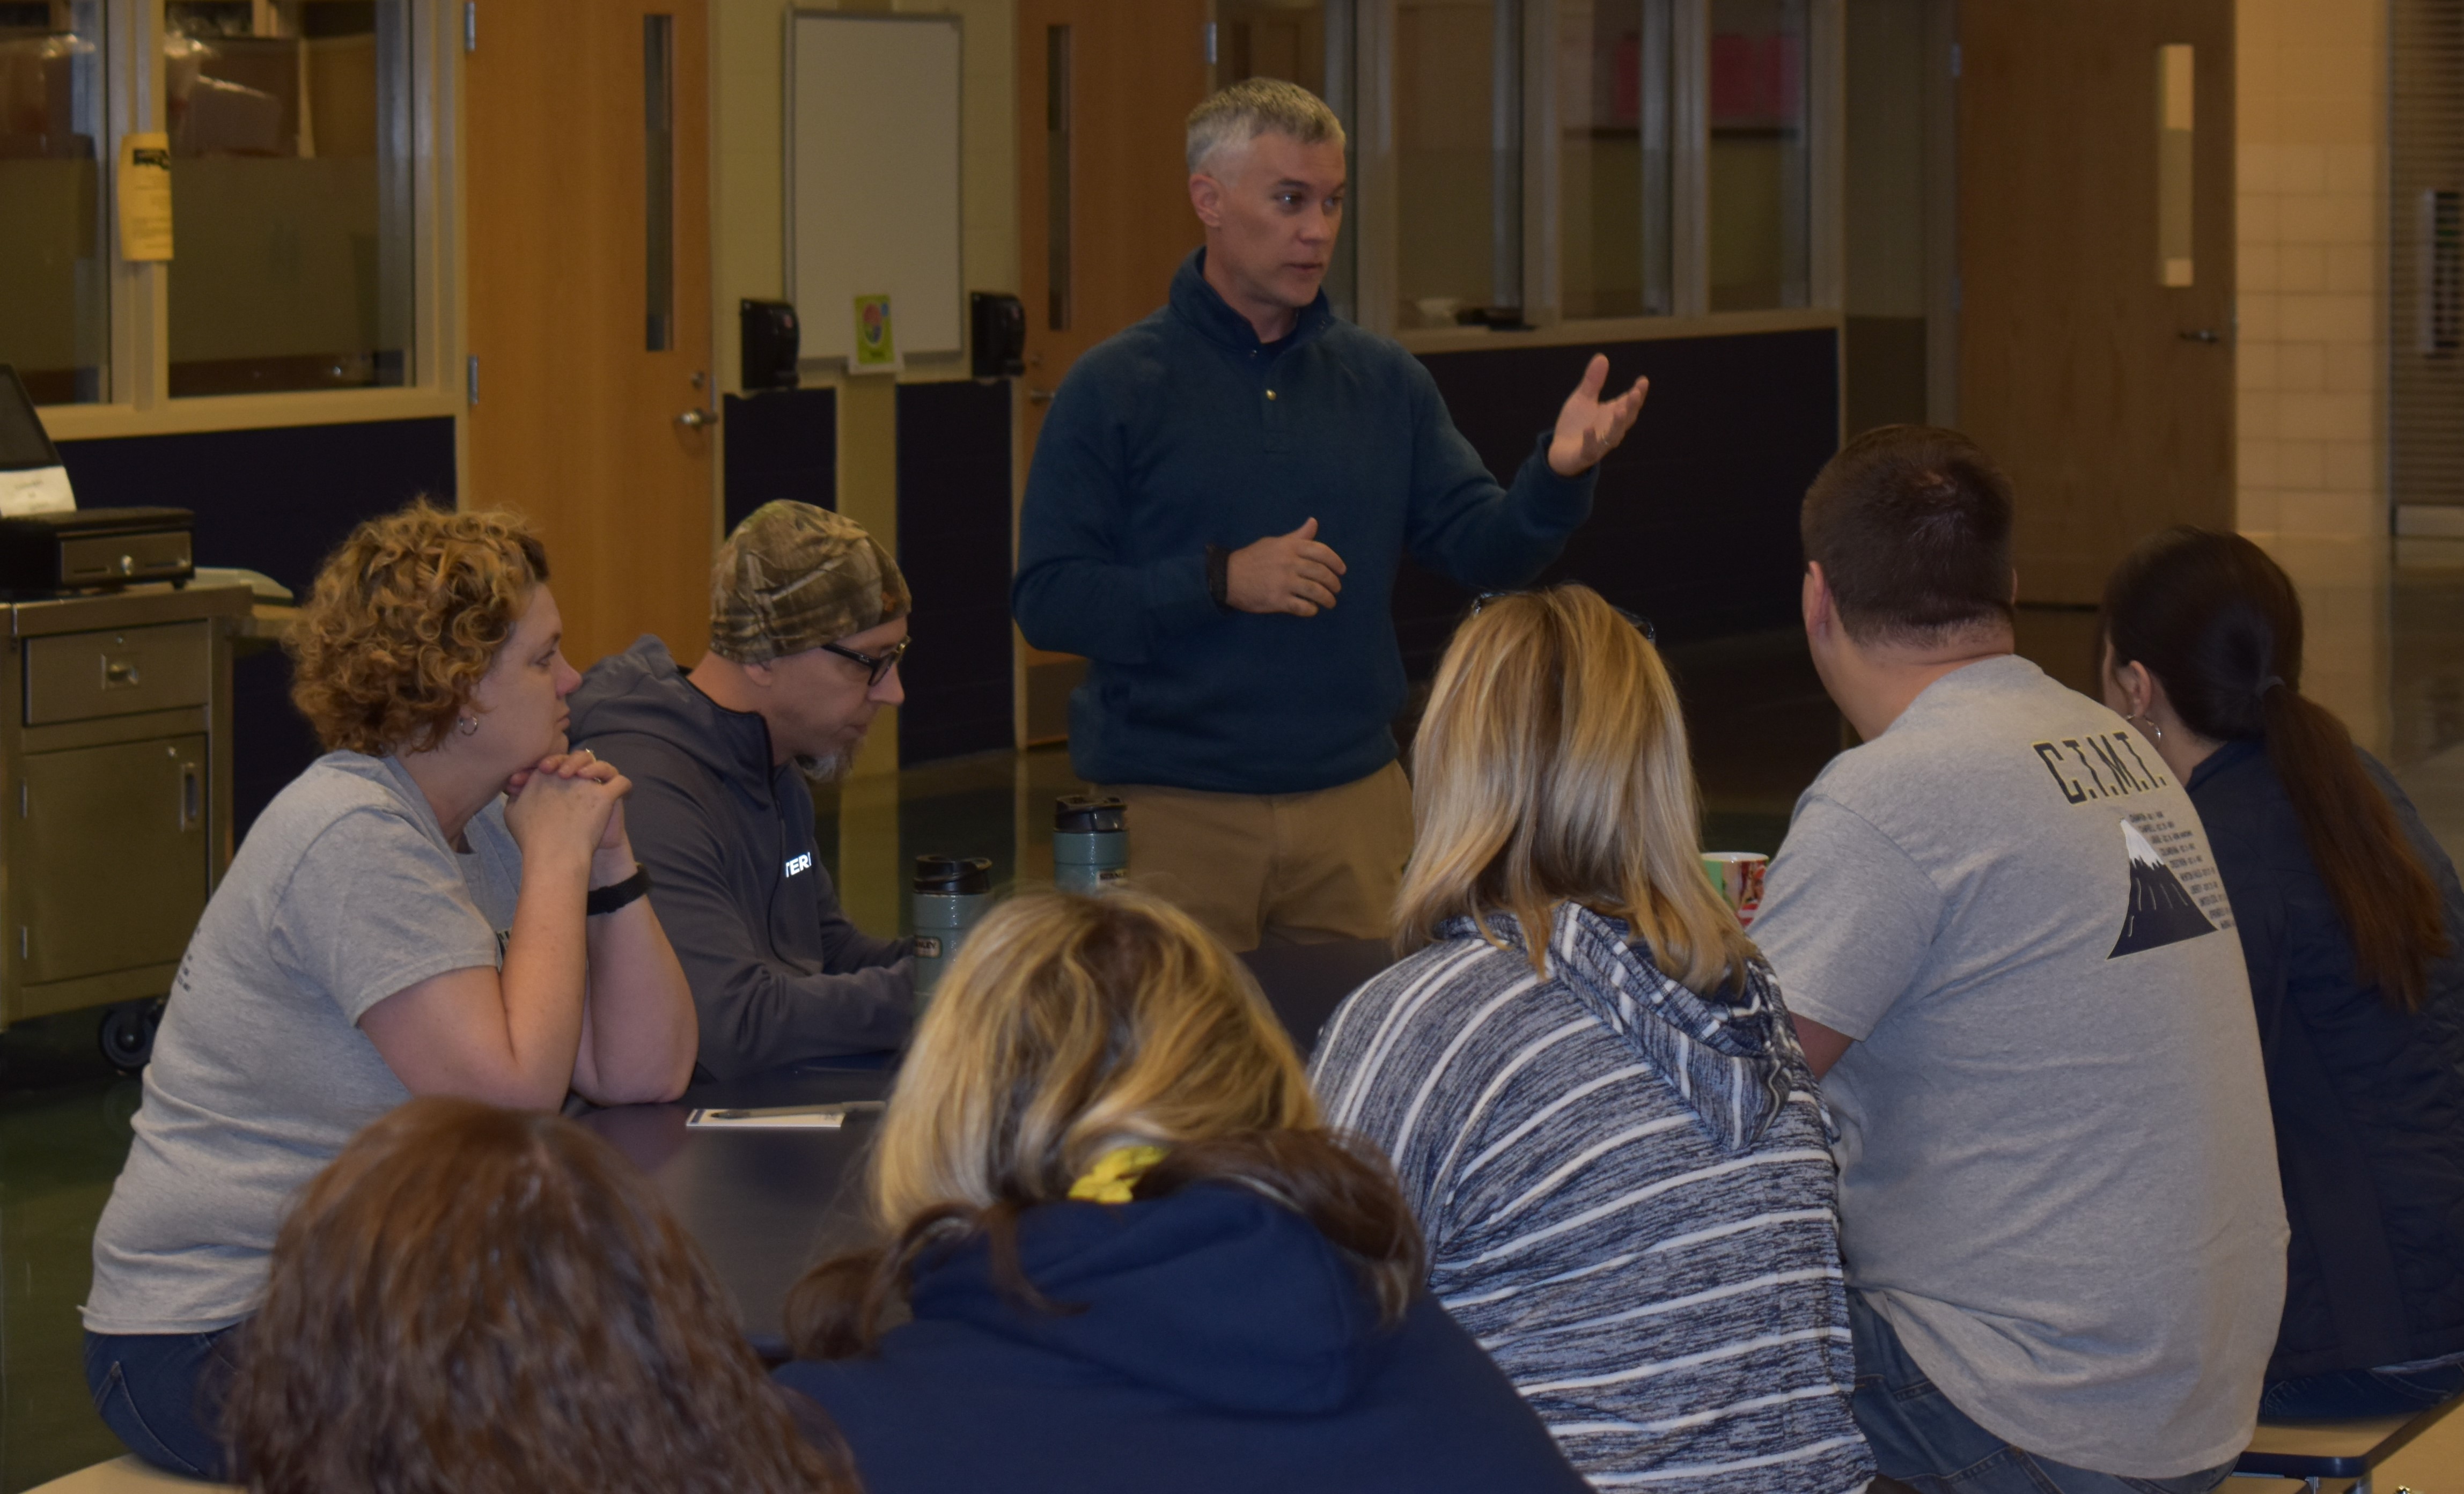 Brookfield school Supt. Toby Gibson is shown at the Nov. 2 Saturday Morning Coffee public meeting, when he announced that the school and police department had reached an agreement to station a police officer full time in the school.